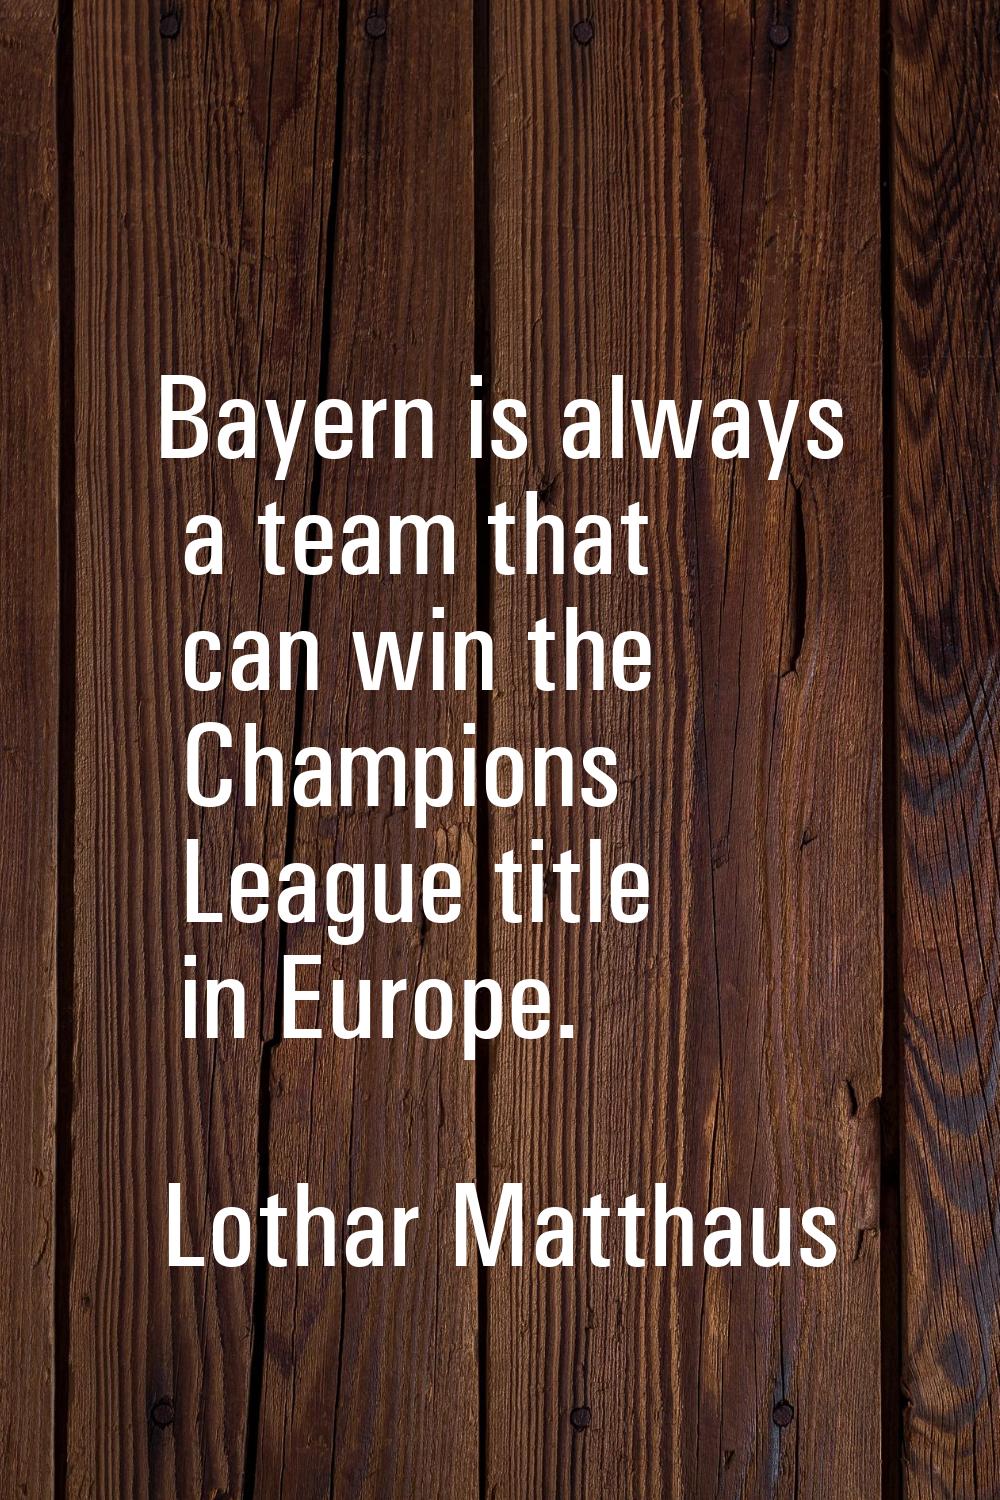 Bayern is always a team that can win the Champions League title in Europe.